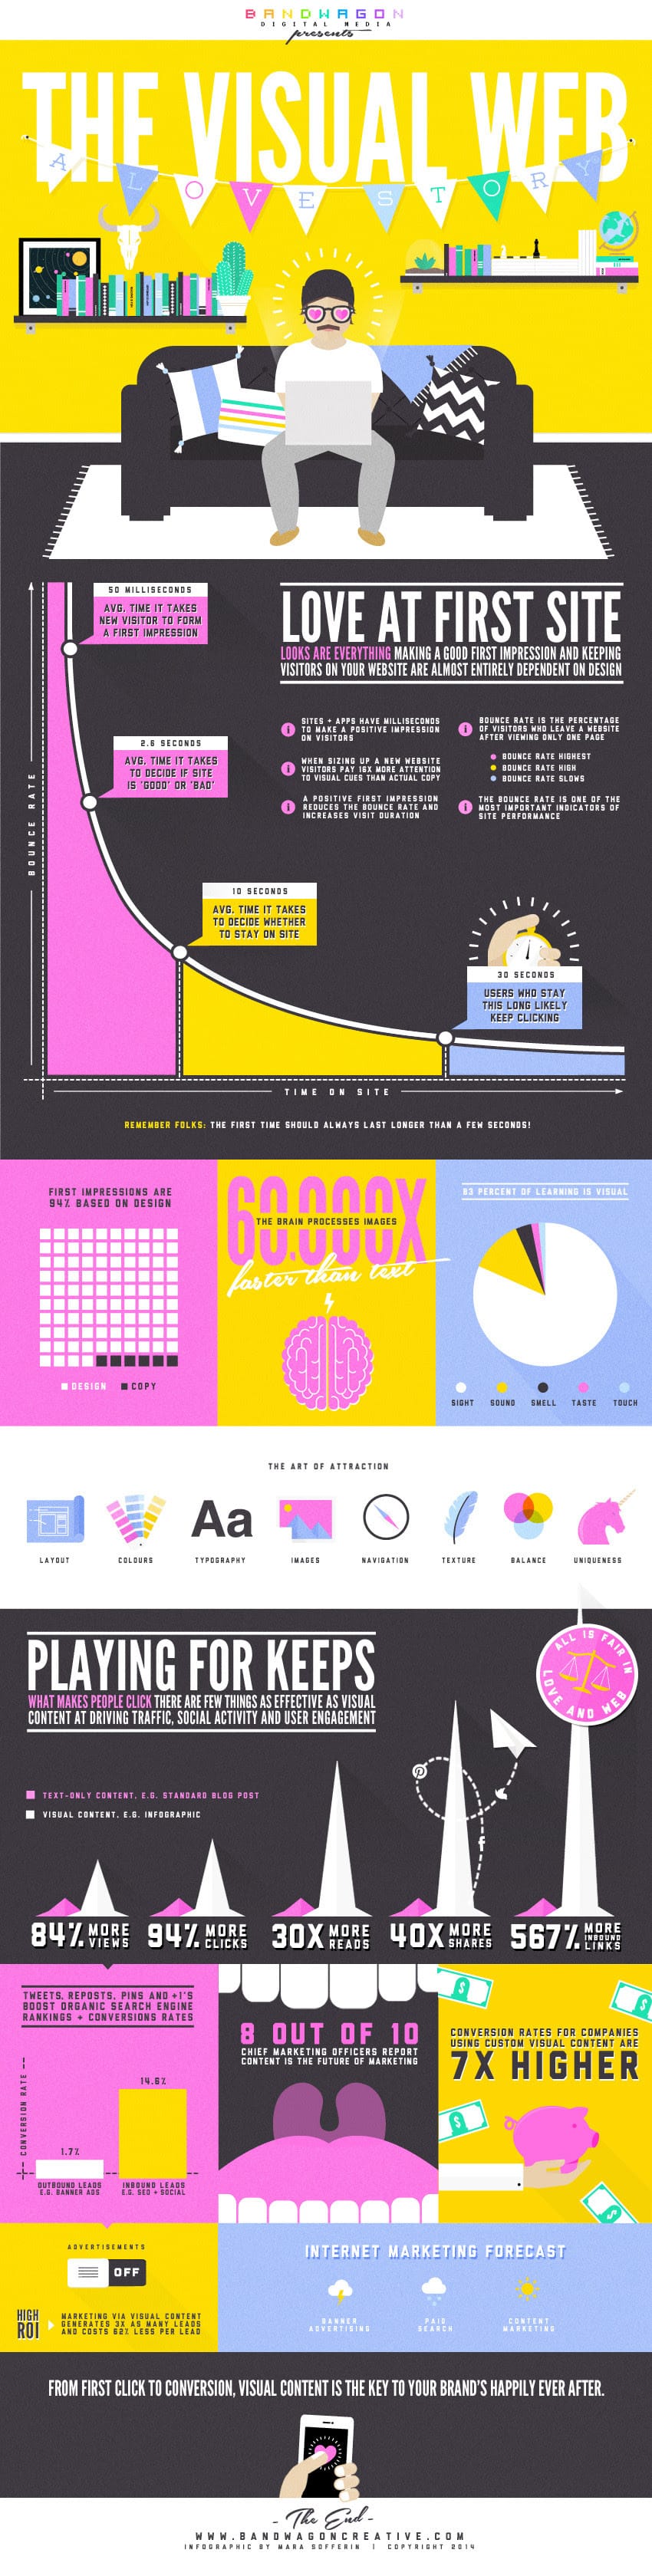 An infographic demonstrating a colorful representation of the importance of visual content